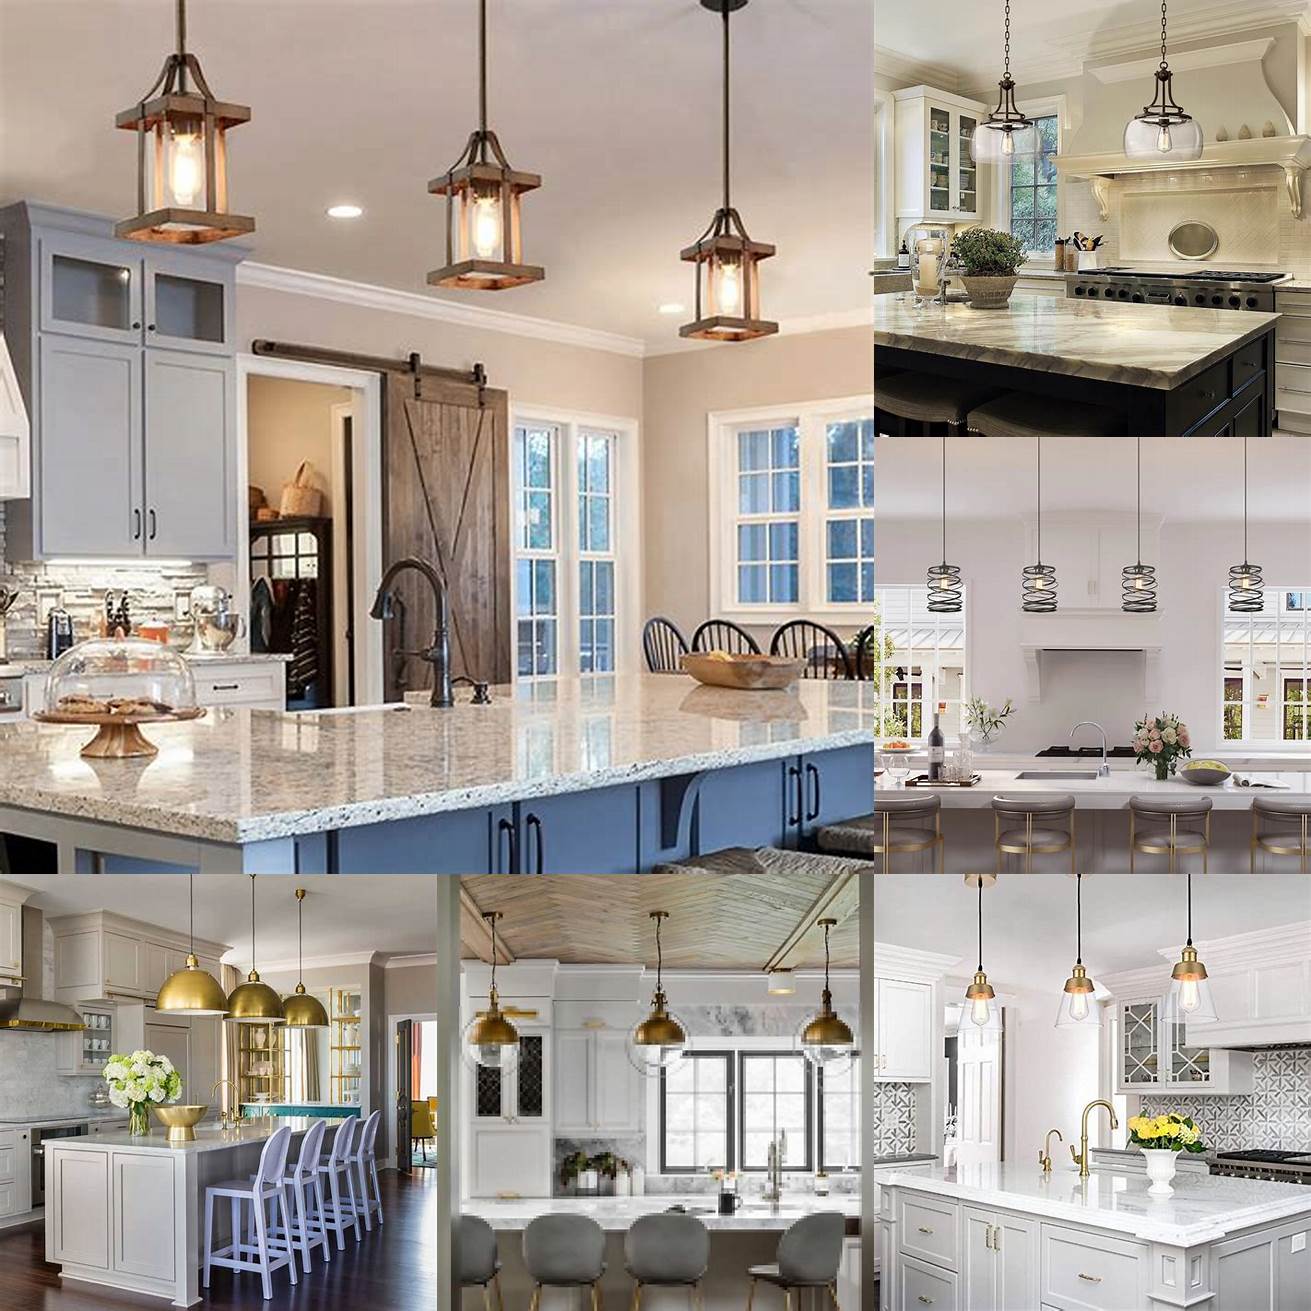 Pendant lighting This is a stylish option that can add a touch of elegance to any kitchen